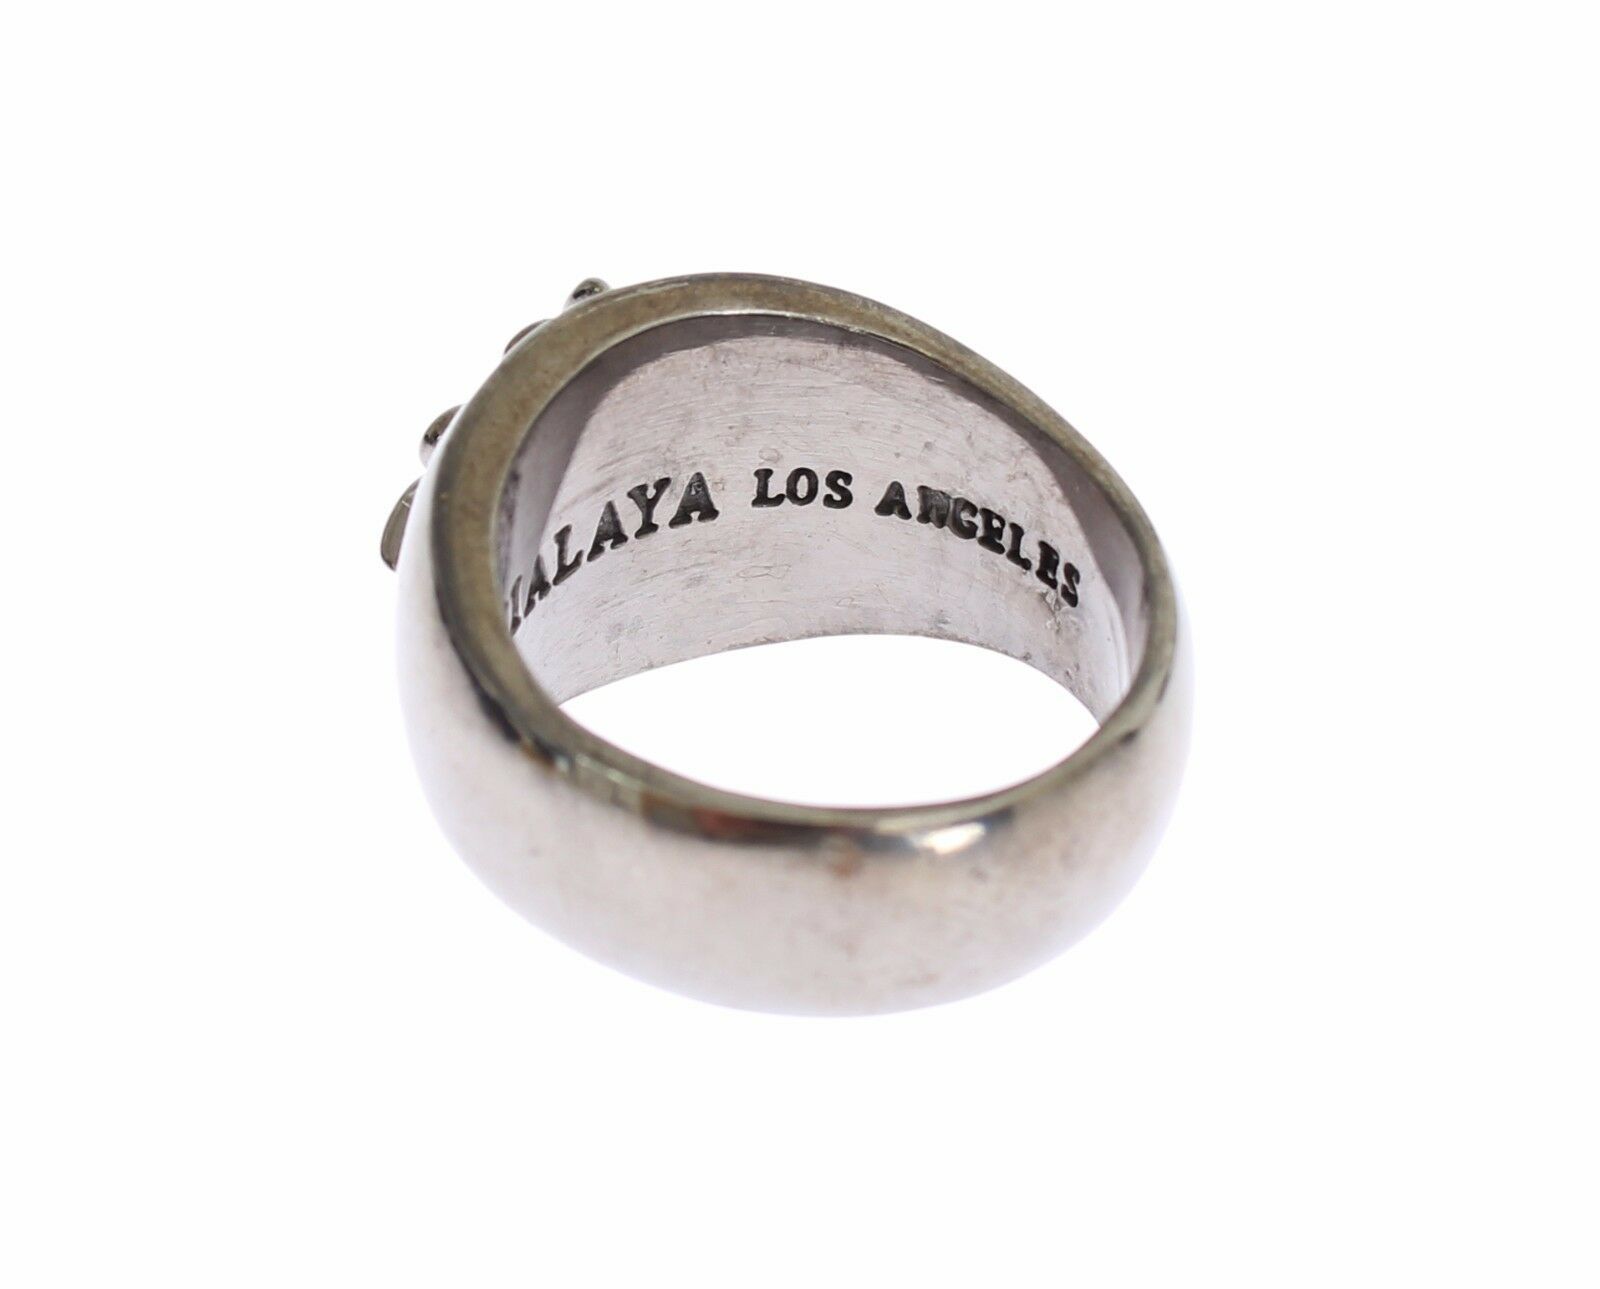 Silver 925 Sterling Authentic  Crest Ring